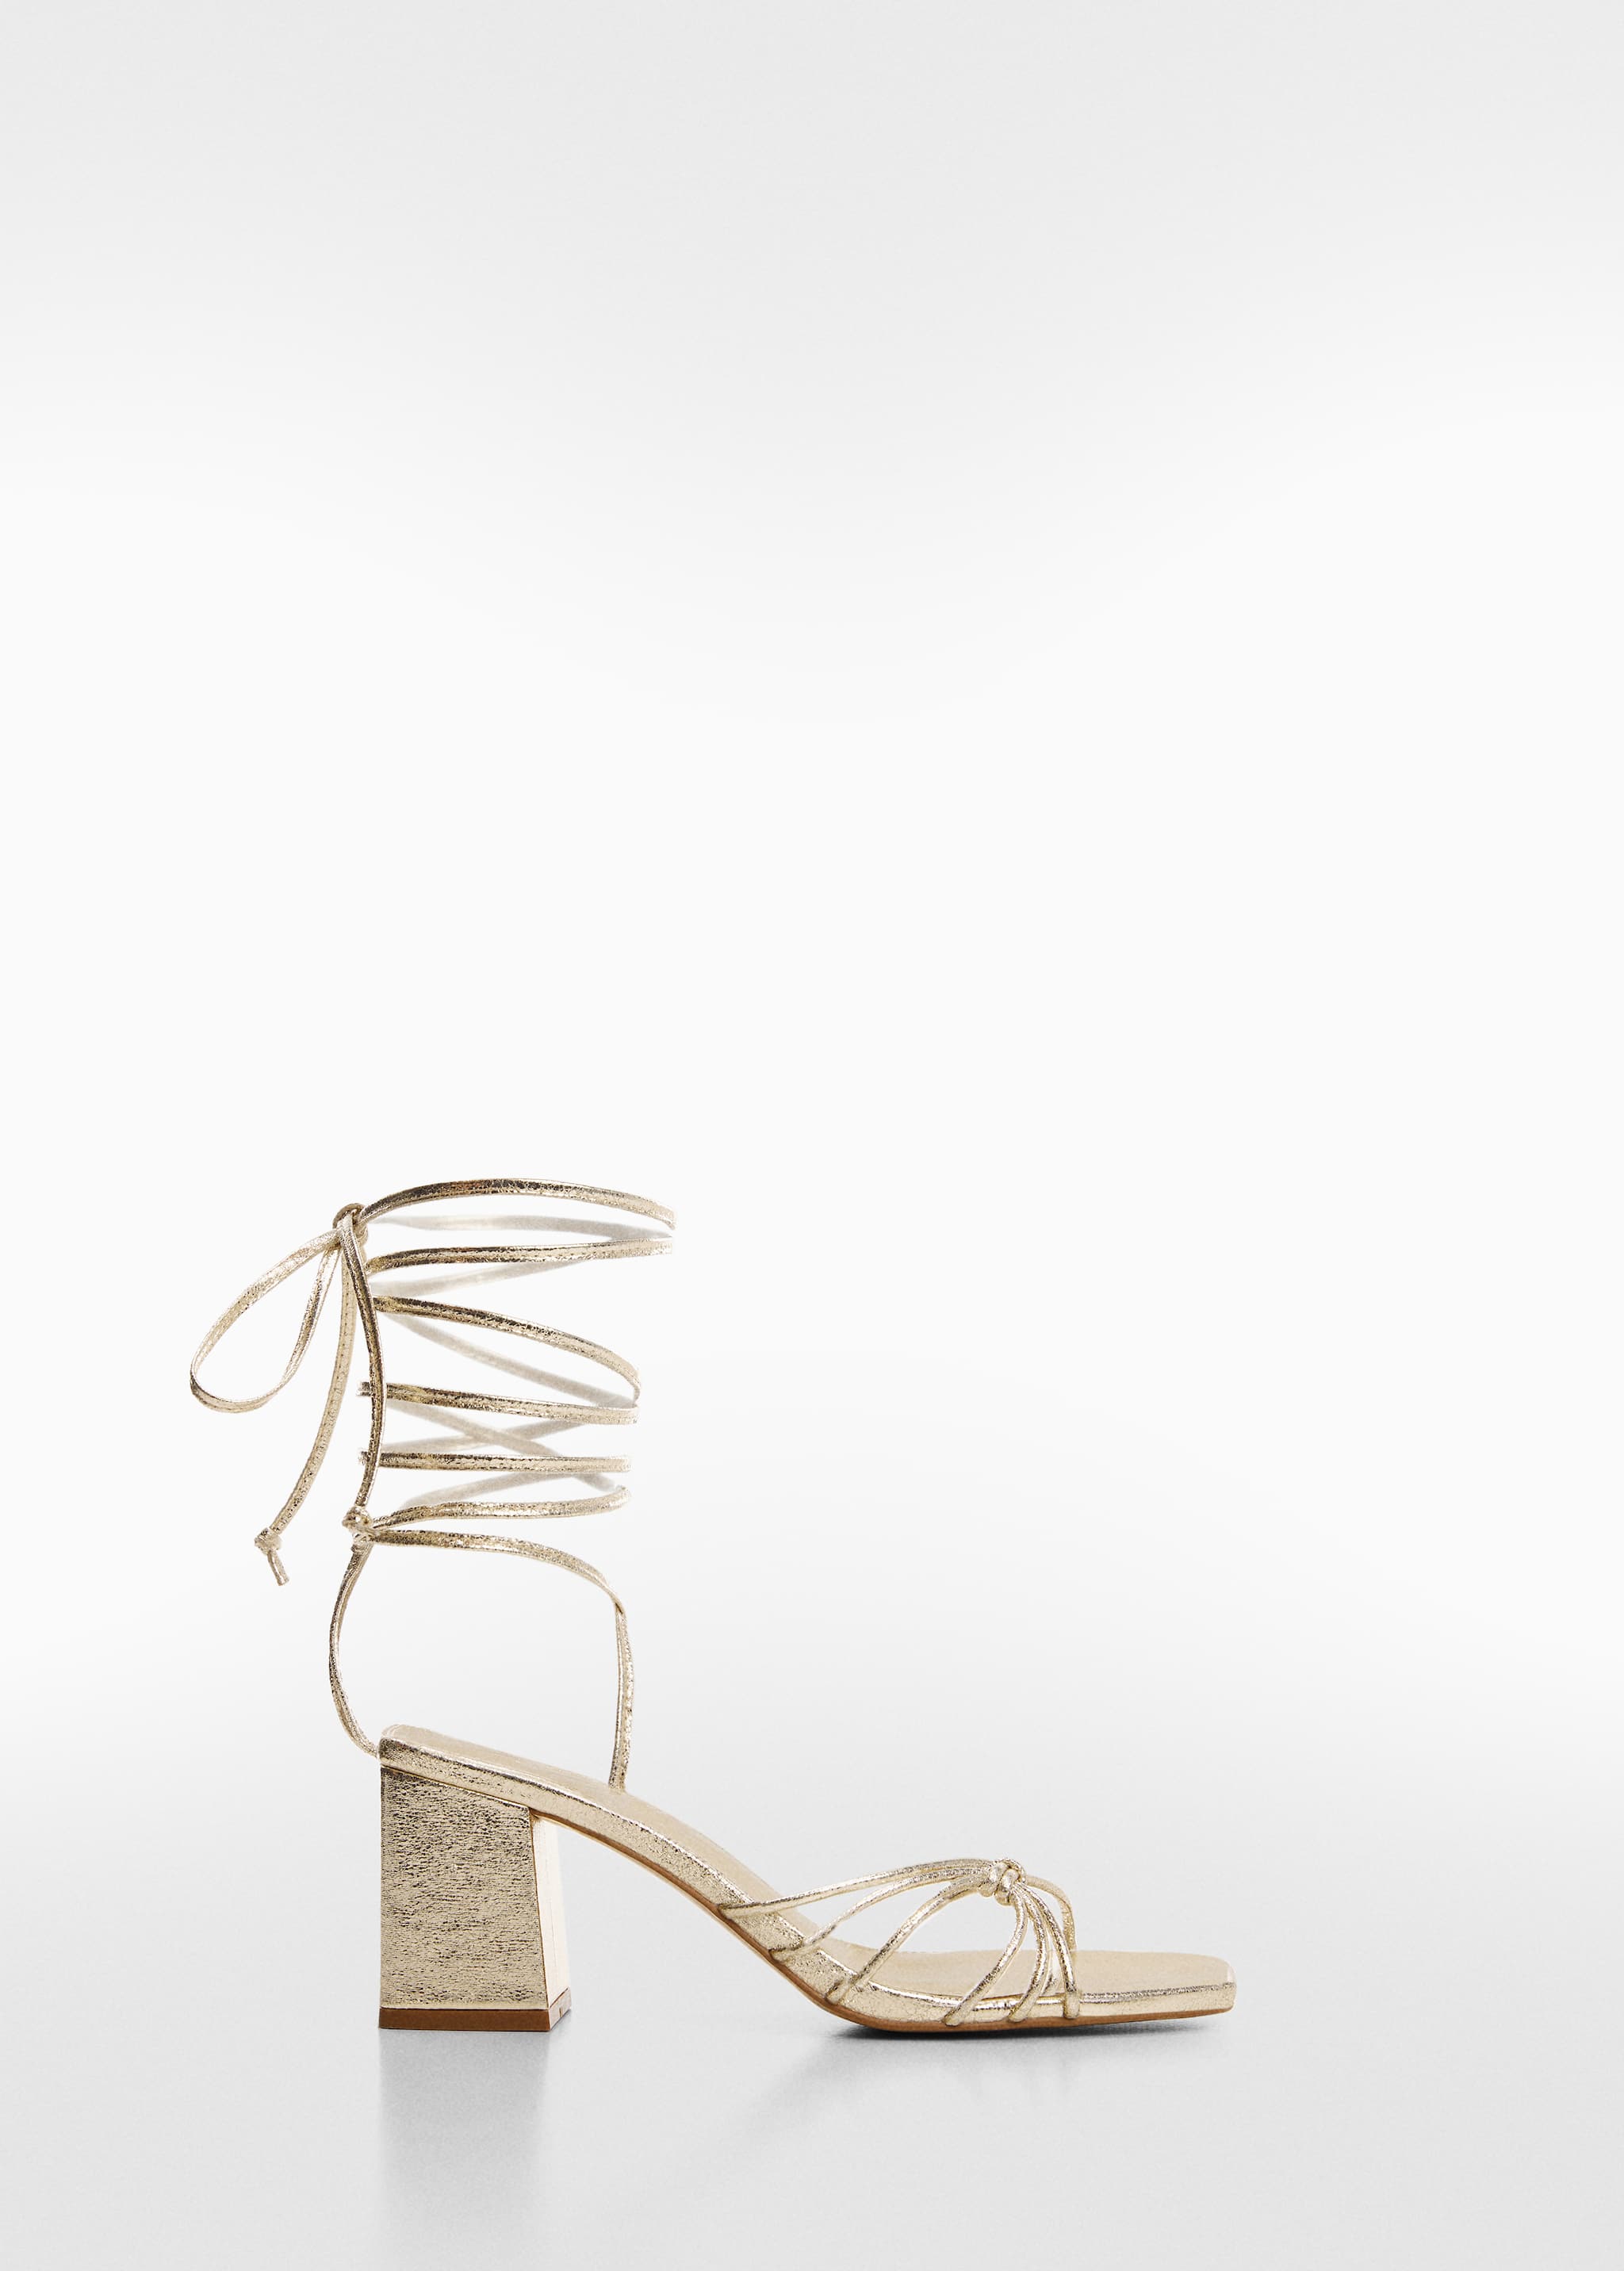 Metallic strappy heeled sandal - Article without model